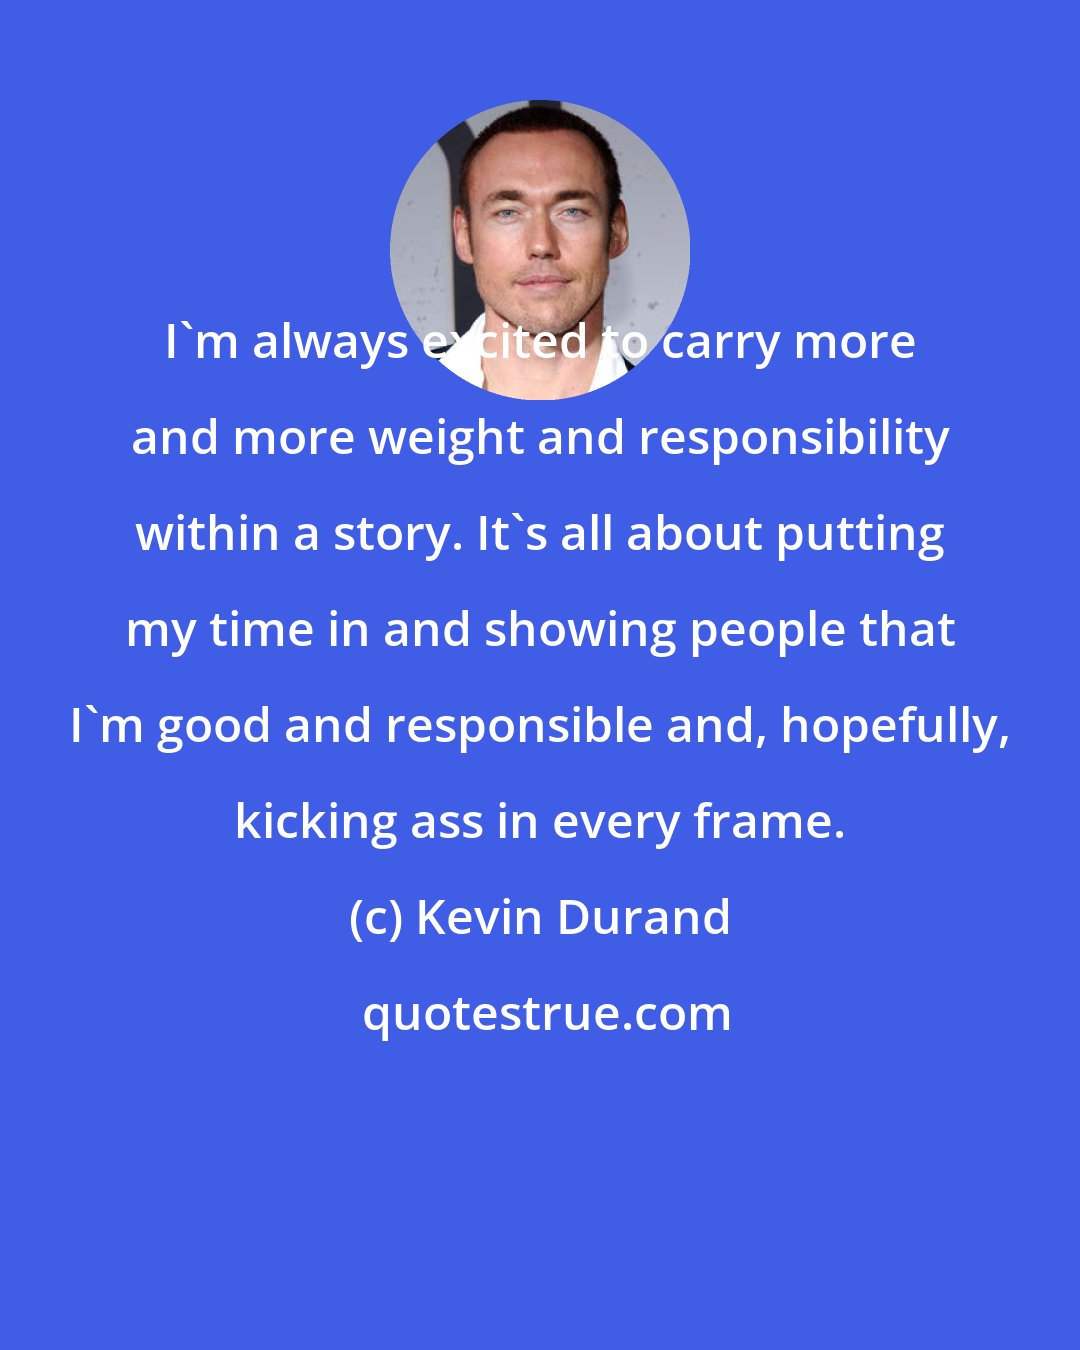 Kevin Durand: I'm always excited to carry more and more weight and responsibility within a story. It's all about putting my time in and showing people that I'm good and responsible and, hopefully, kicking ass in every frame.